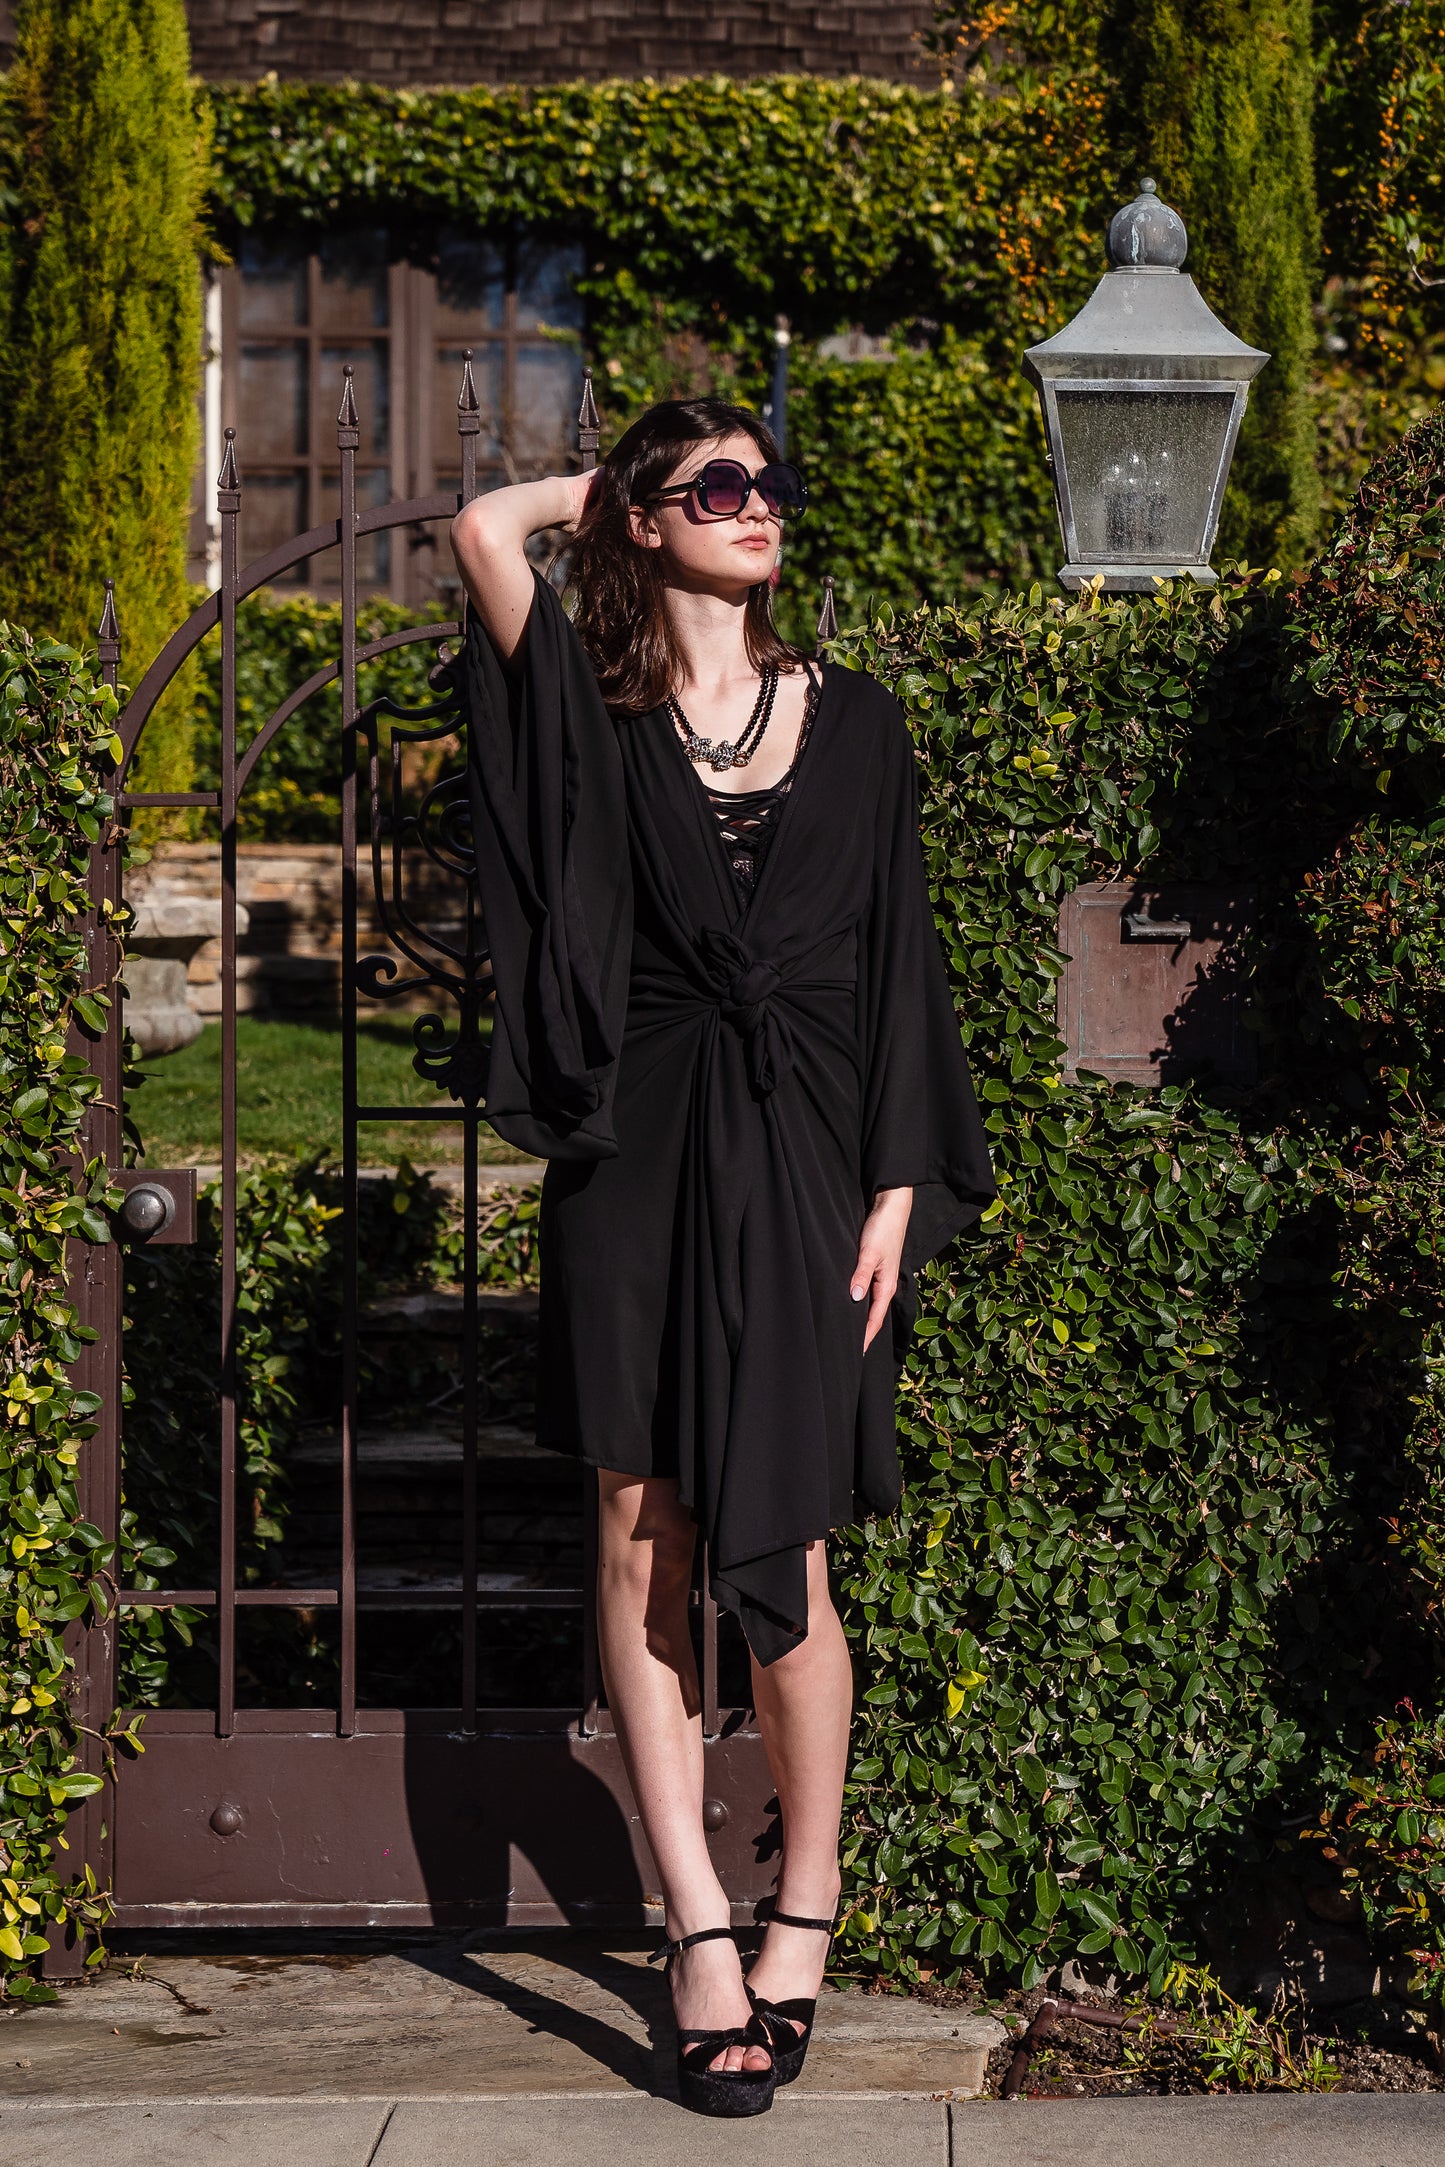 Jennafer Grace solid black fashion kimono robe. Featuring a wrap tie waist for a cinched look, v-neck, square sleeves, and an ankle length hem. Classic, bohemian retro aesthetic.